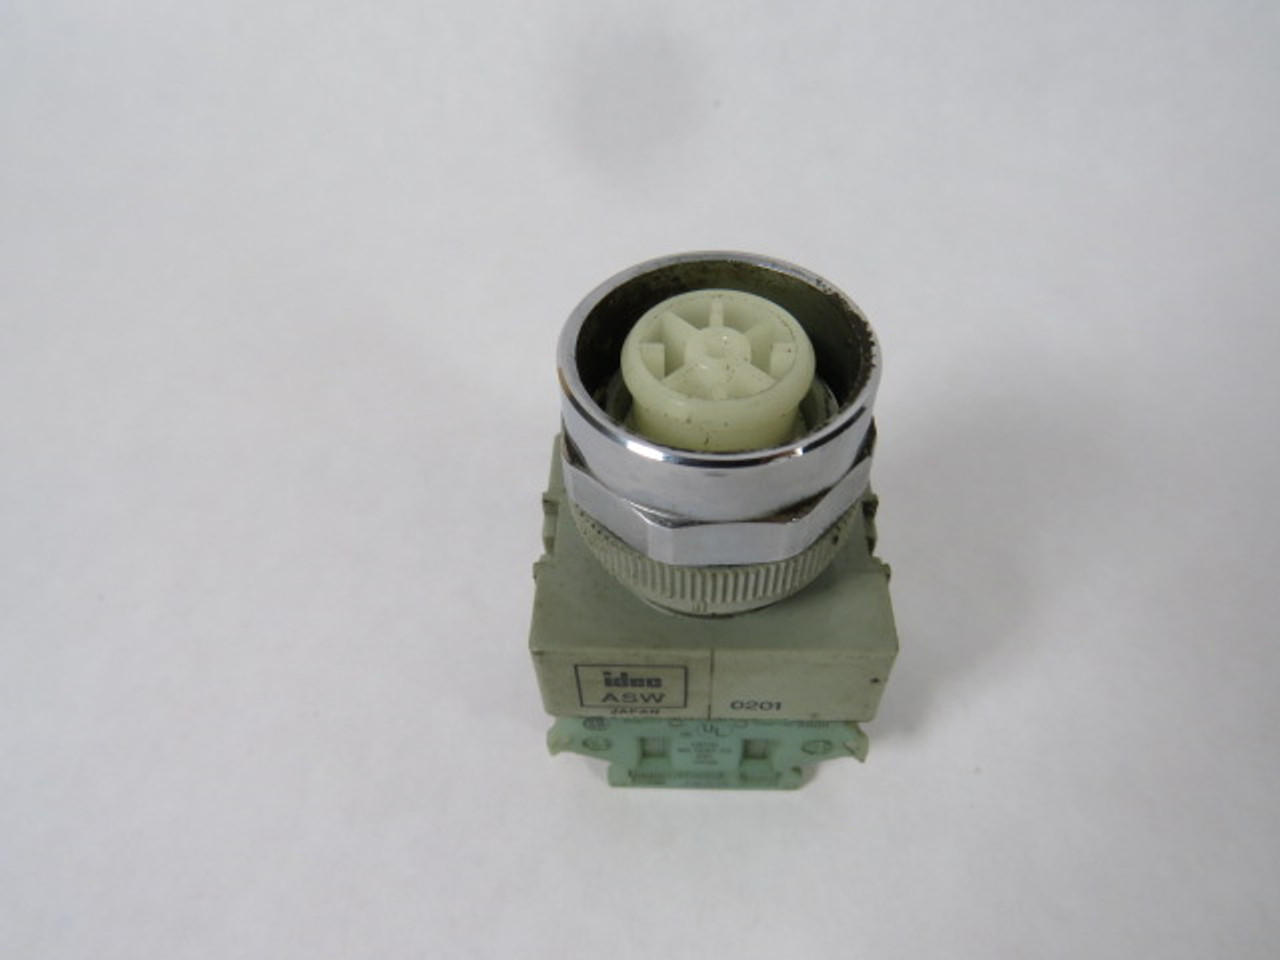 IDEC ASW220 Selector Switch 600V 10A 2NO 2-Position No Operator USED